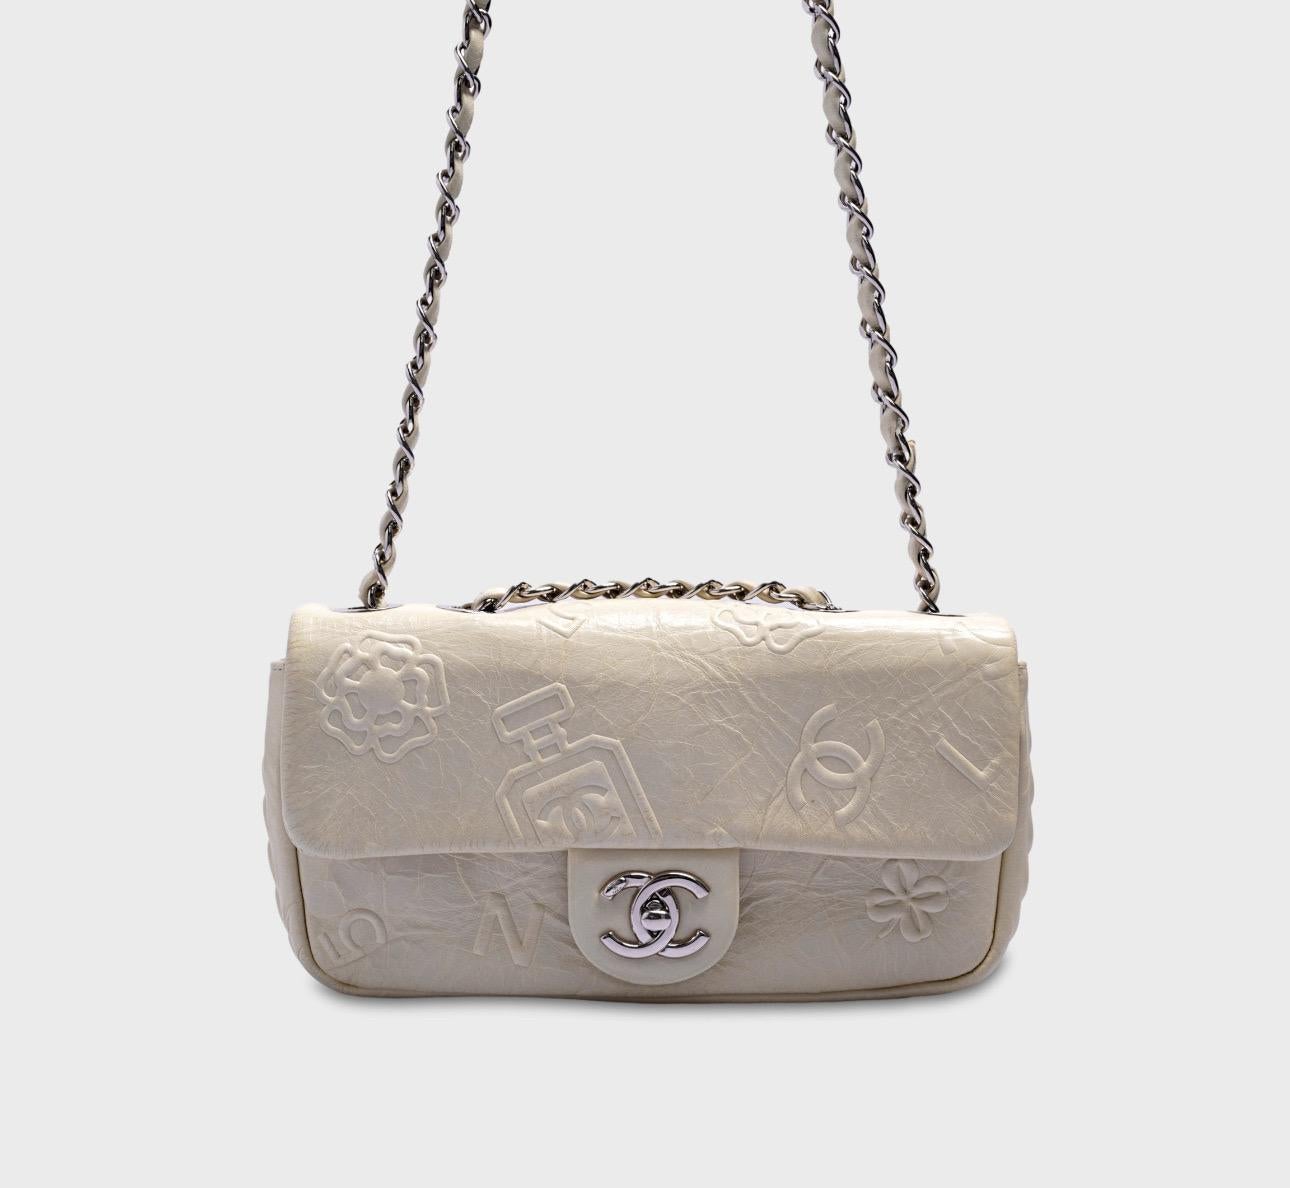 Chanel White Embossed Leather Precious Symbols Small Flap Bag For Sale 14